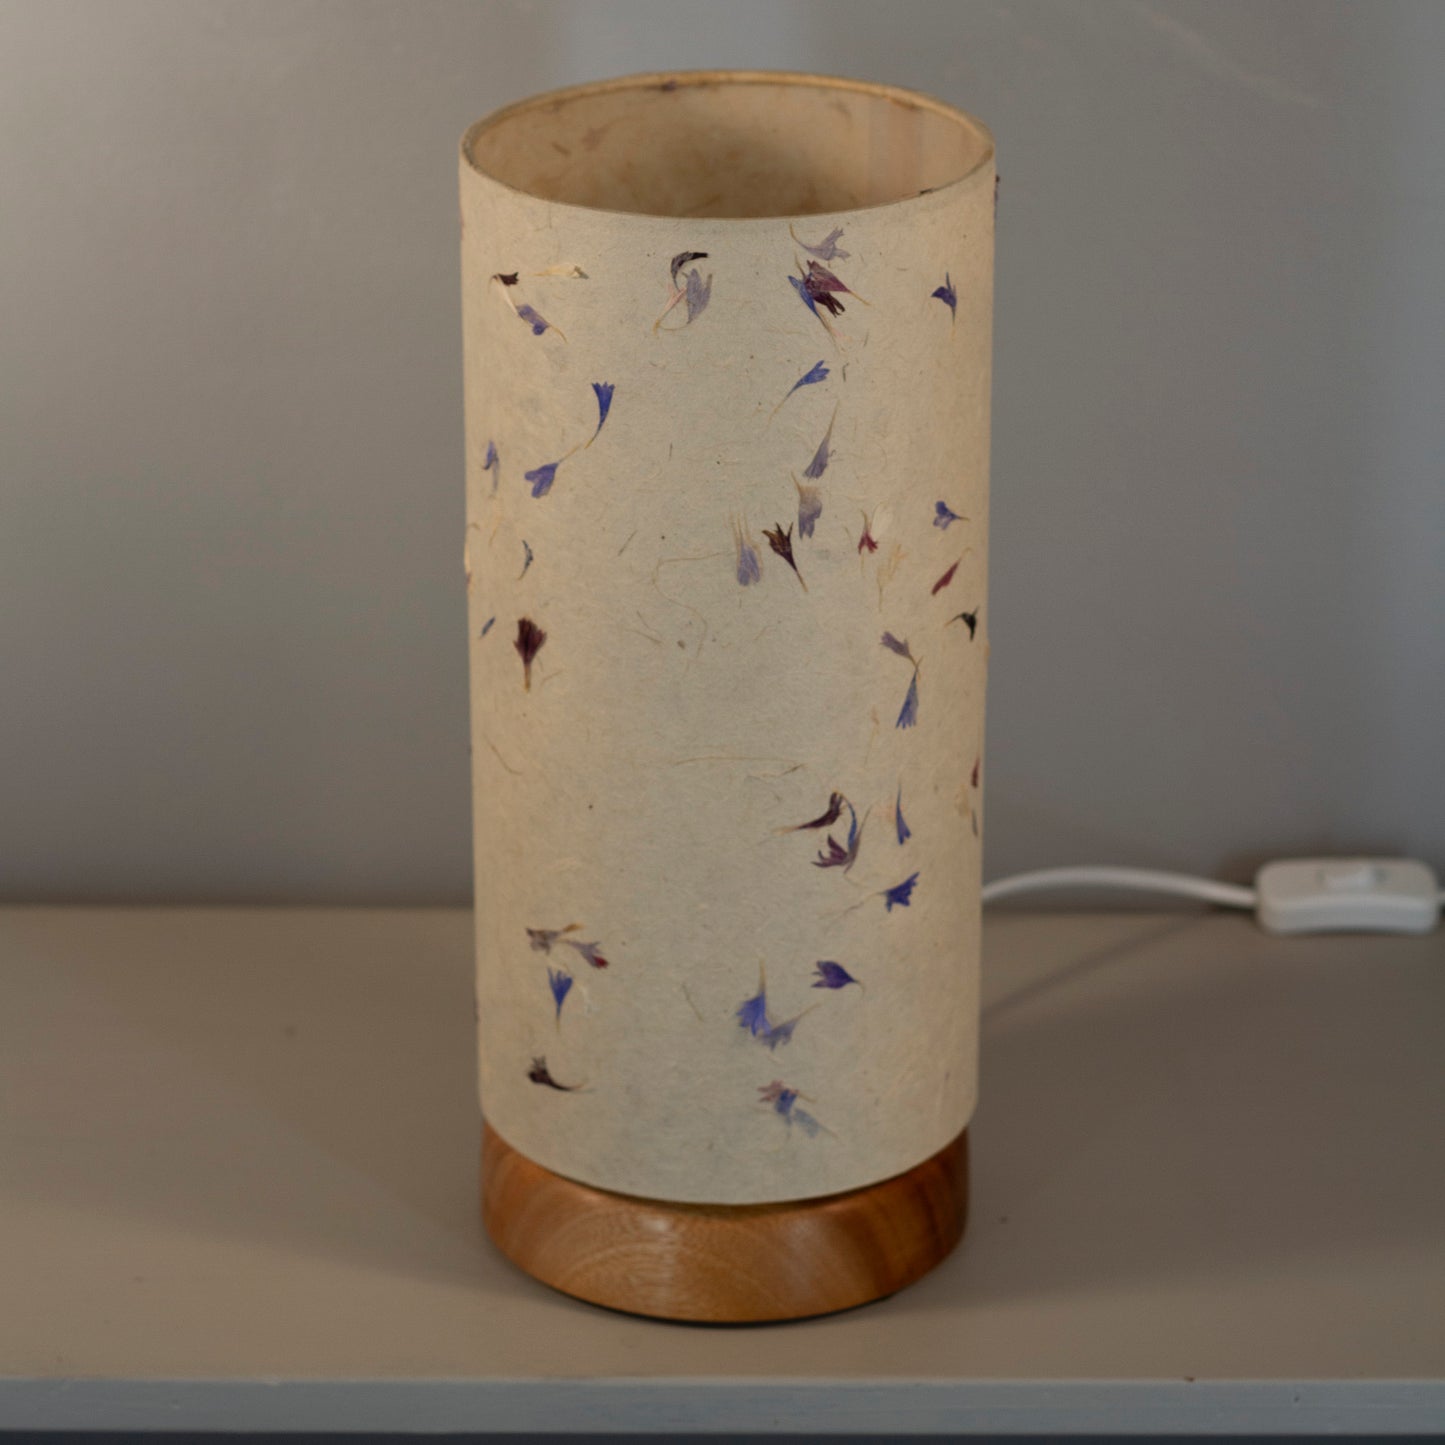 Flat Round Sapele Table Lamp with 15cm x 30cm Lampshade in P34 ~ Cornflower Petals